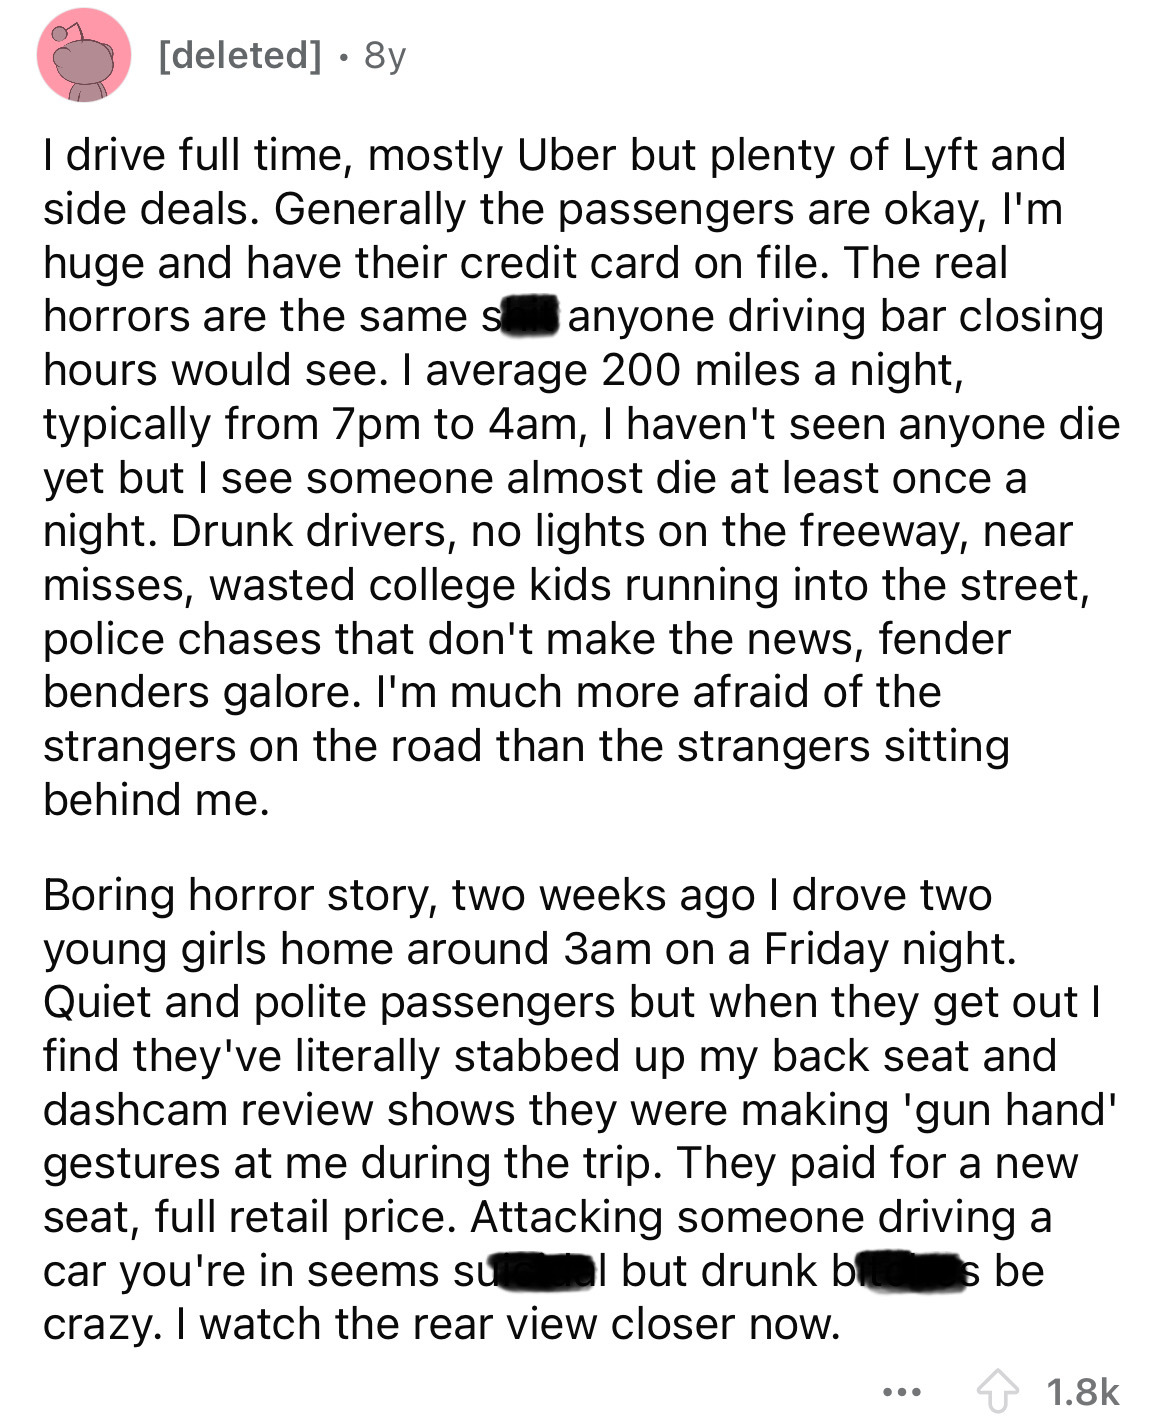 document - deleted . 8y I drive full time, mostly Uber but plenty of Lyft and side deals. Generally the passengers are okay, I'm huge and have their credit card on file. The real horrors are the same s anyone driving bar closing hours would see. I average